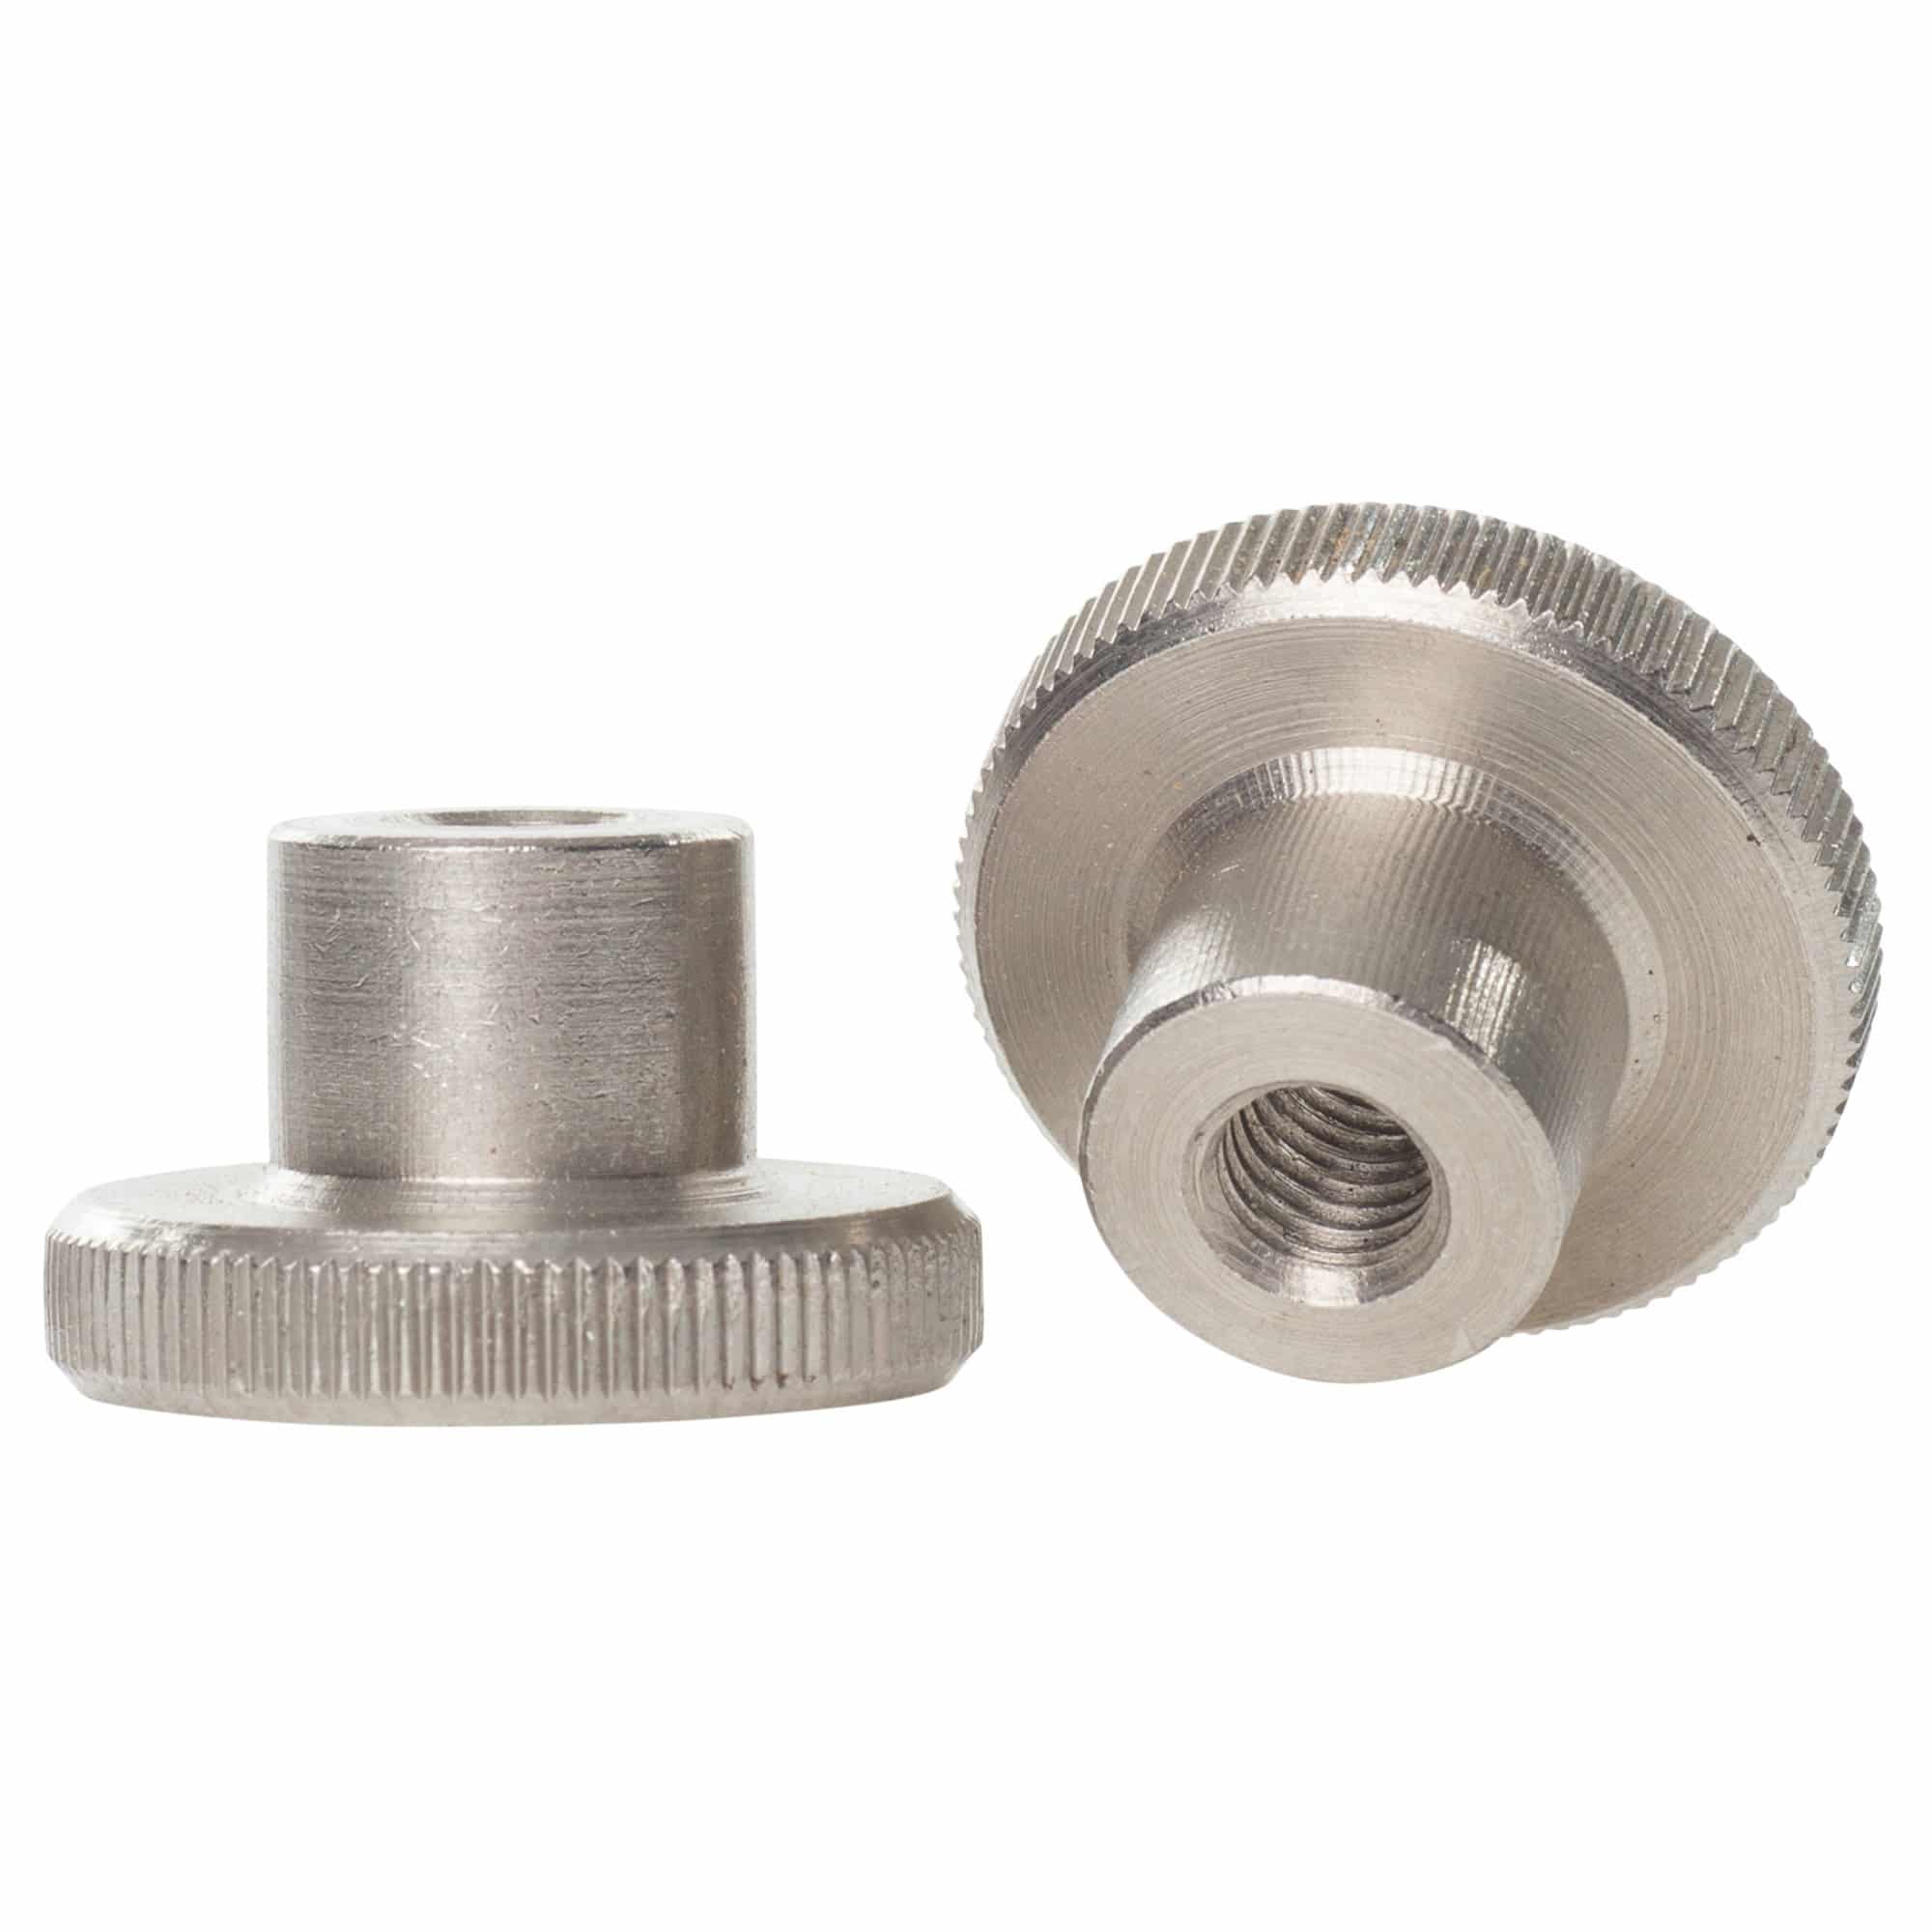 Knurled nuts, high type DIN 466